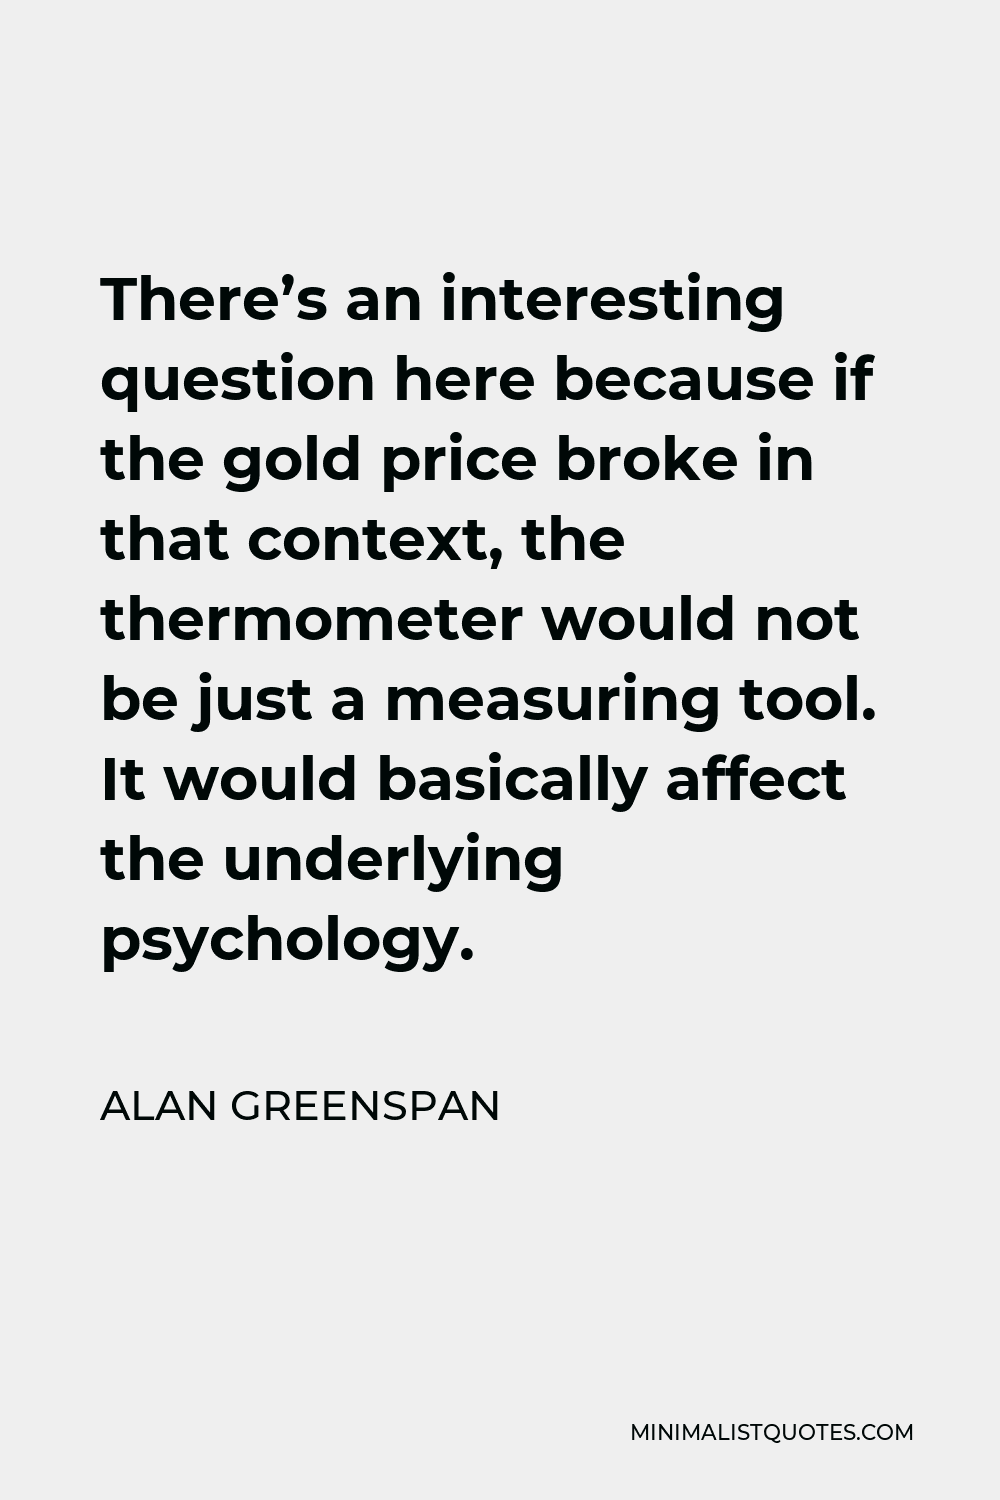 Alan Greenspan Quote - There’s an interesting question here because if the gold price broke in that context, the thermometer would not be just a measuring tool. It would basically affect the underlying psychology.